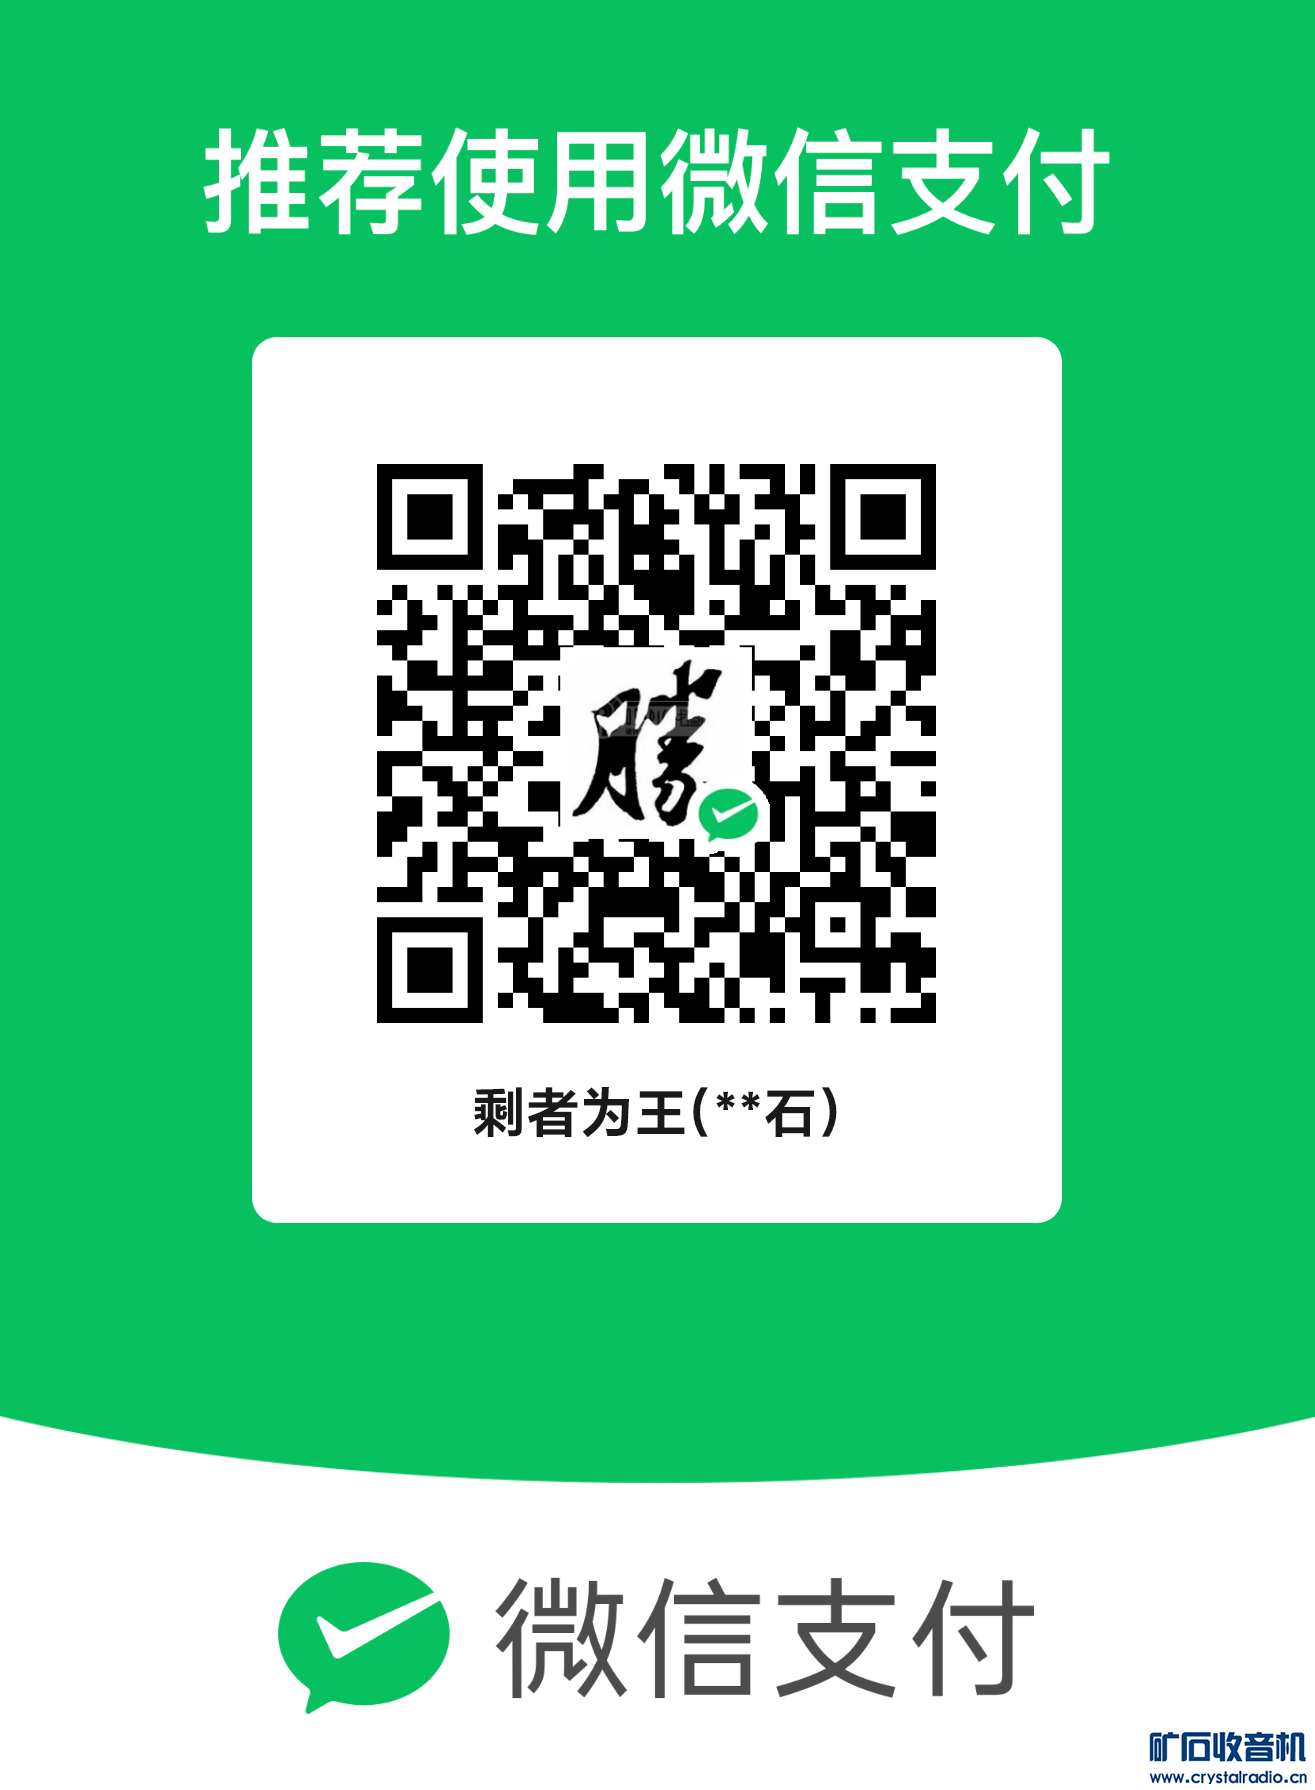 mm_facetoface_collect_qrcode_1678064630215.png